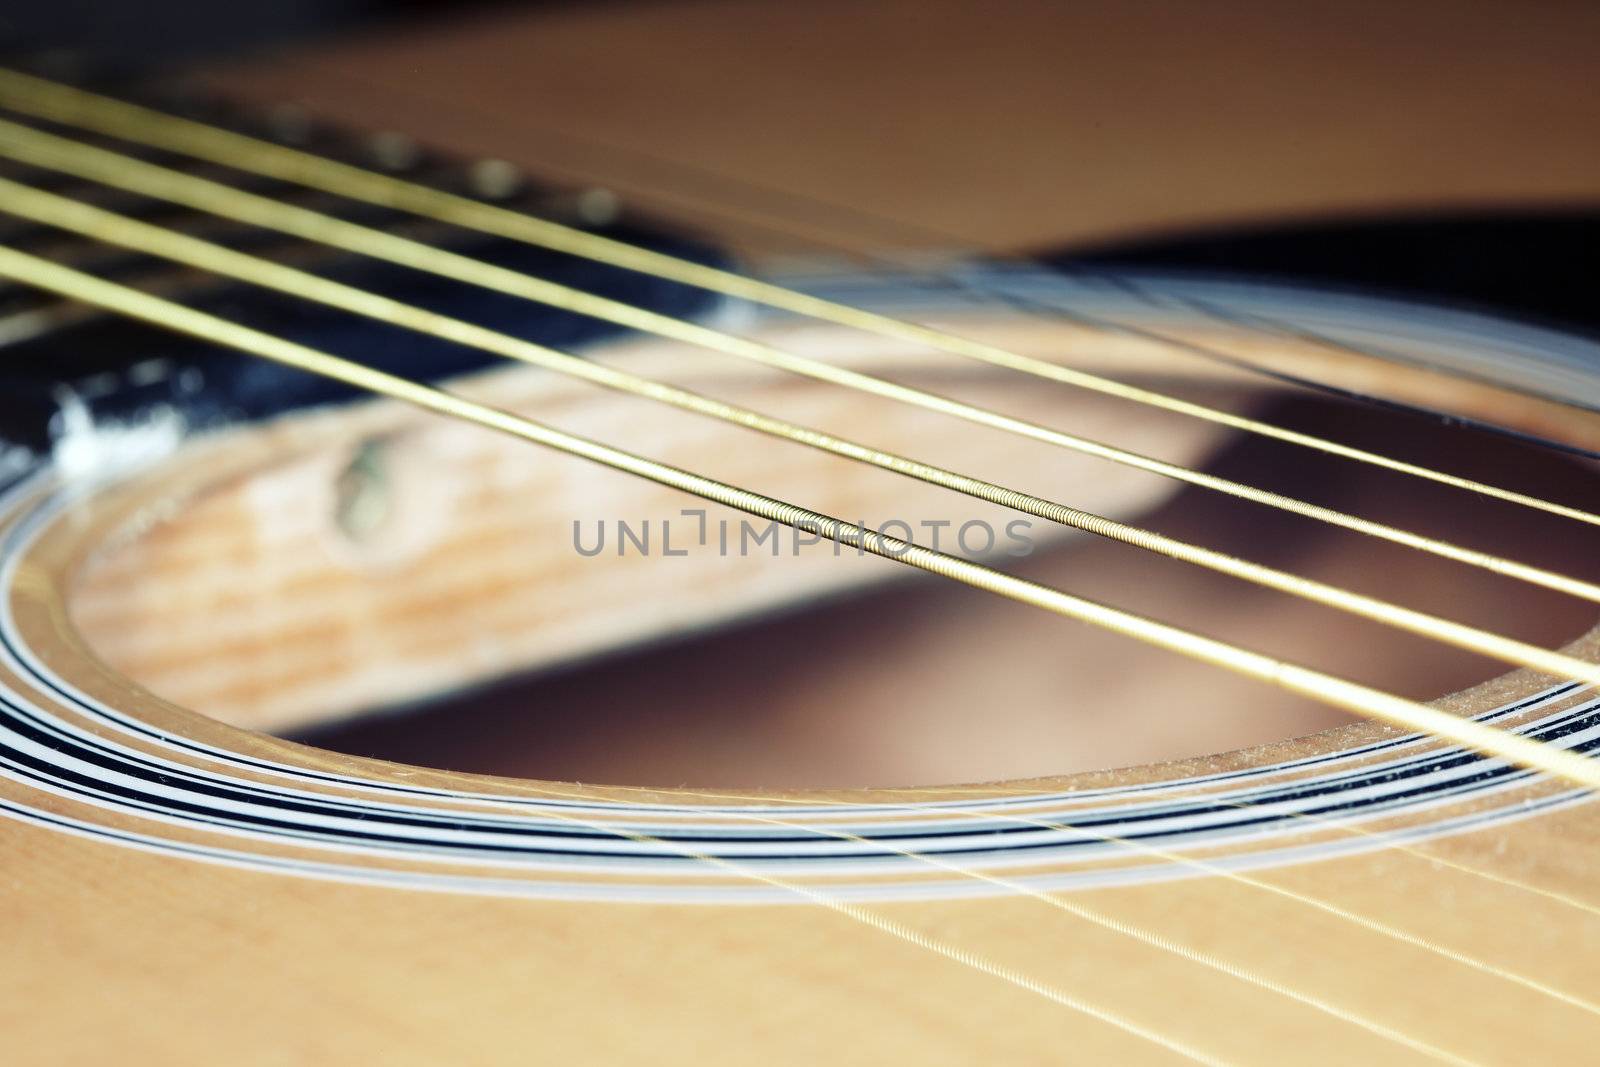 Old acoustic guitar strings. Horizontal close-up photo with shallow depth of field